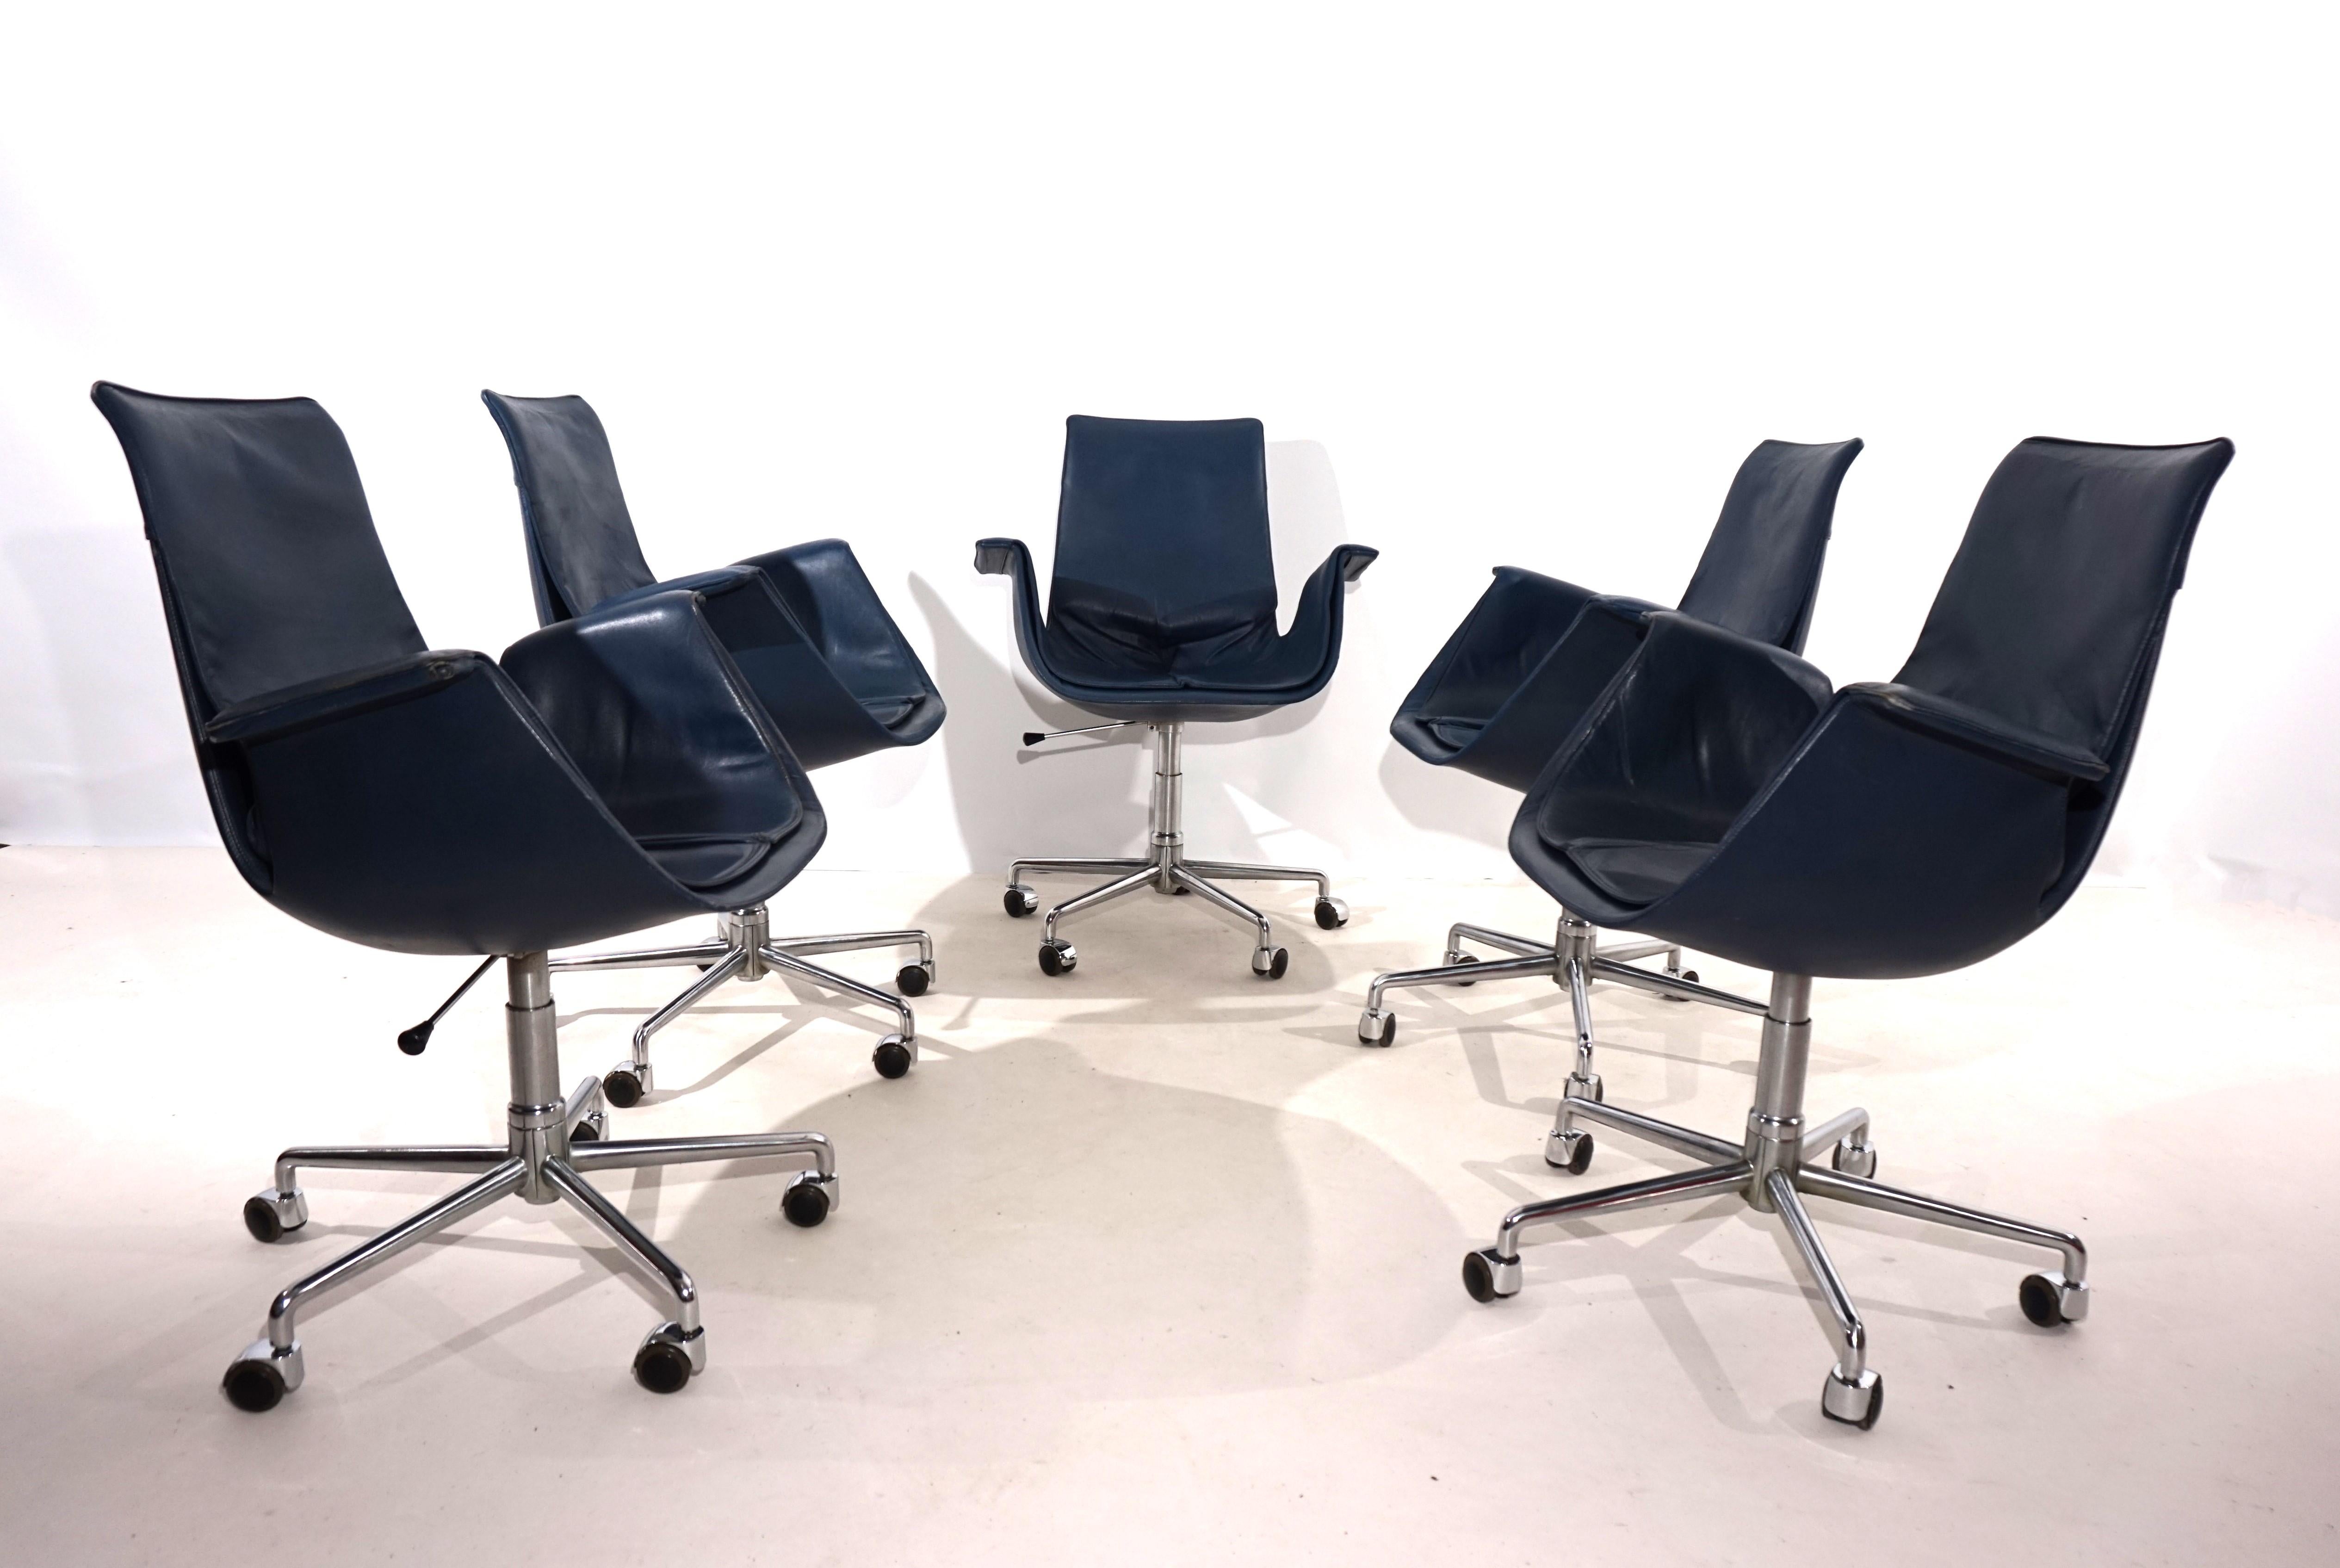 This Kill 6727, the so-called Bird or Tulip chair, is the hard-to-find version of an office chair with height adjustment. The blue leather of the chairs comes in excellent condition with a beautiful patina and minimal signs of wear. Only one chair